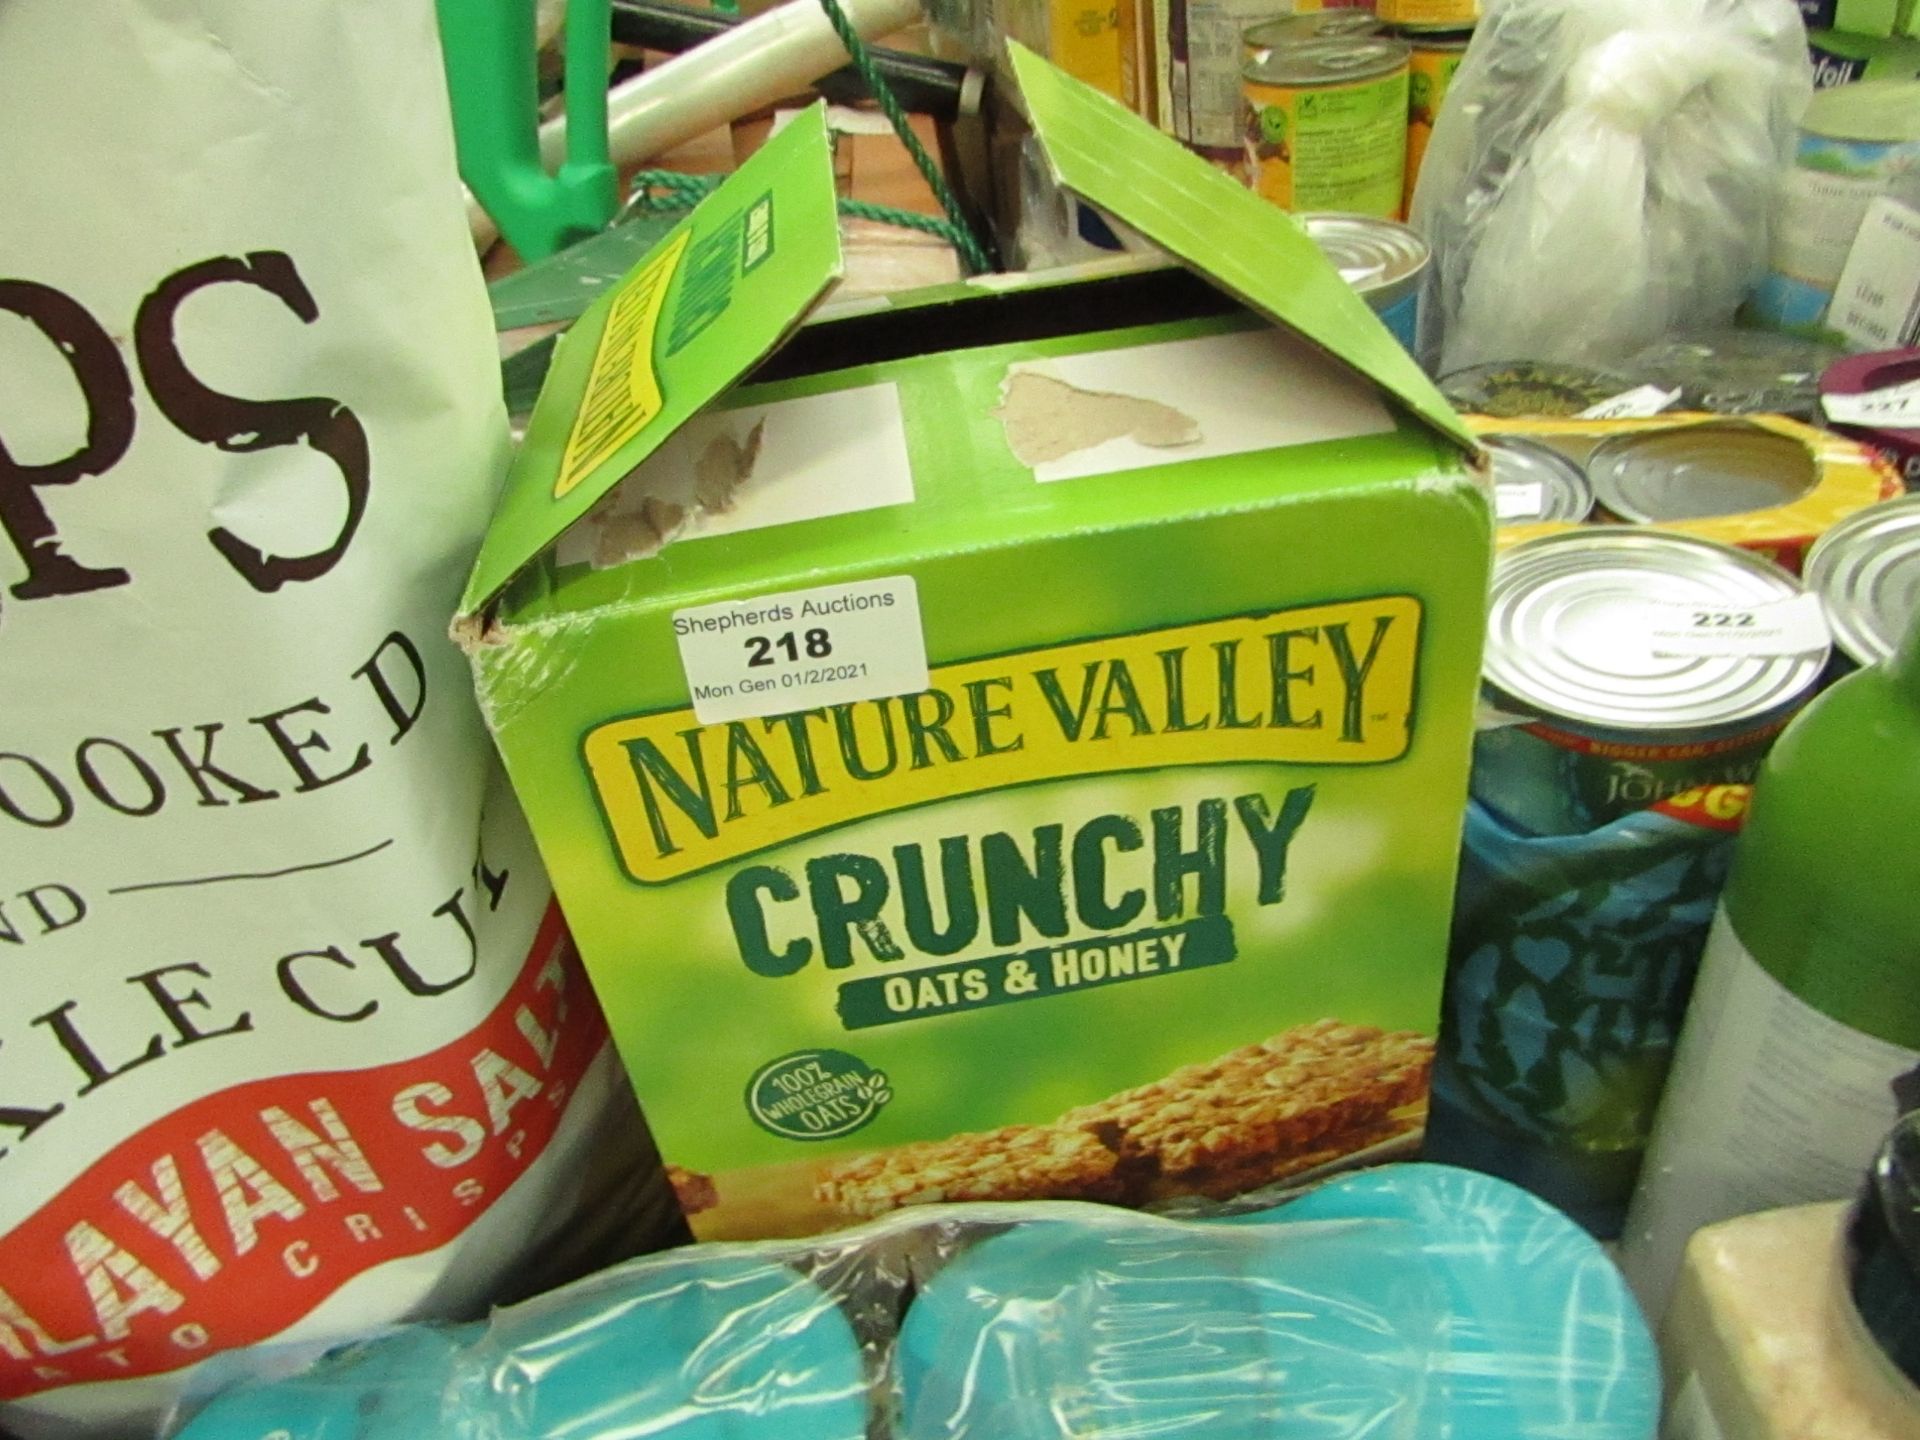 40x 2-Bar Packs of Nature Valley - Crunchy Oats & Honey - 1680g - Best before 16/08/2021 - Unchecked